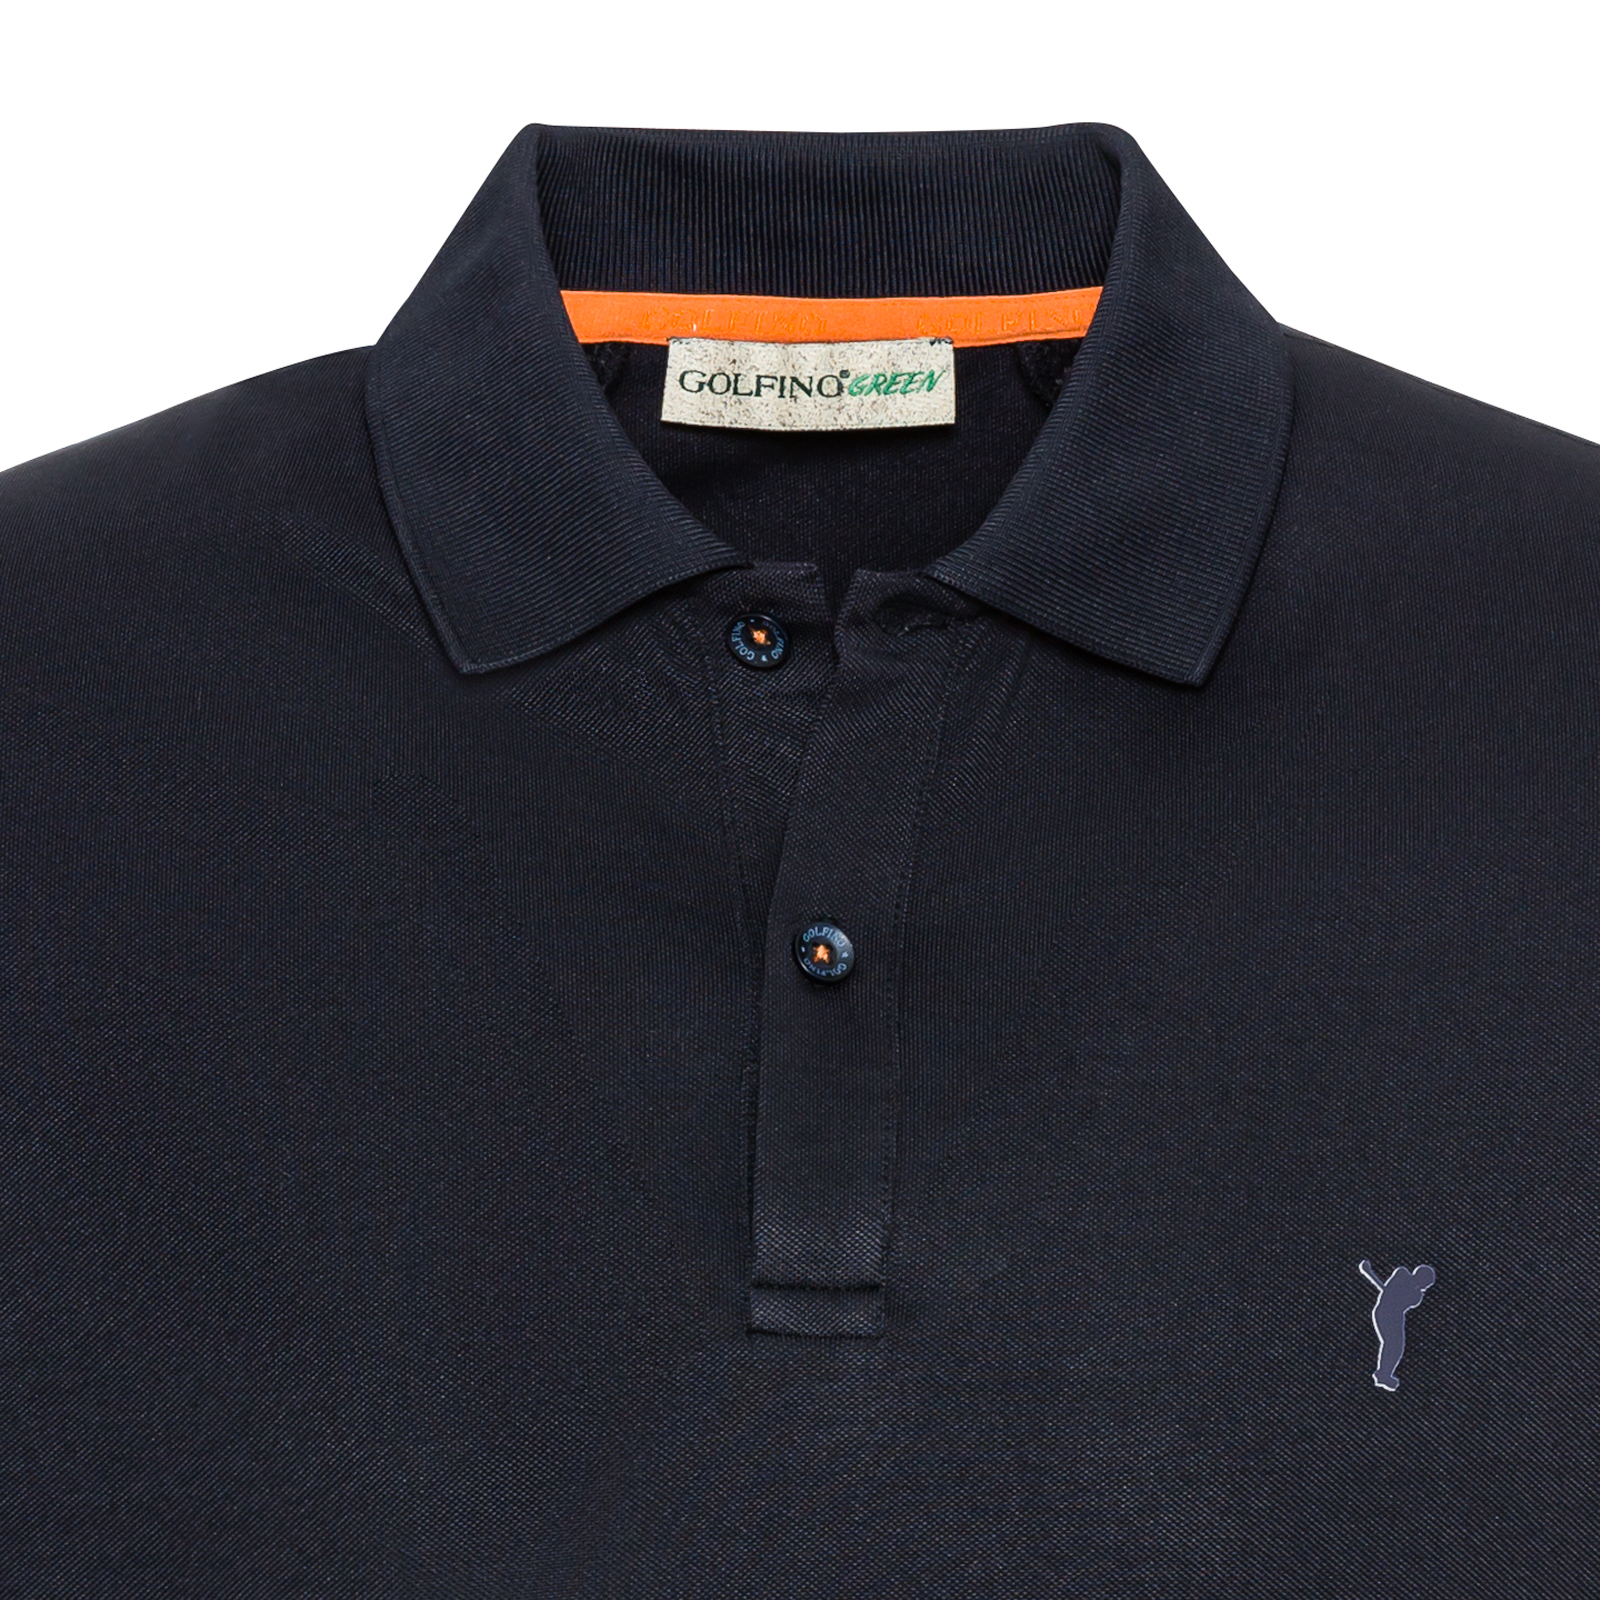 Men's breathable golf polo shirt made from recycled synthetic fibre